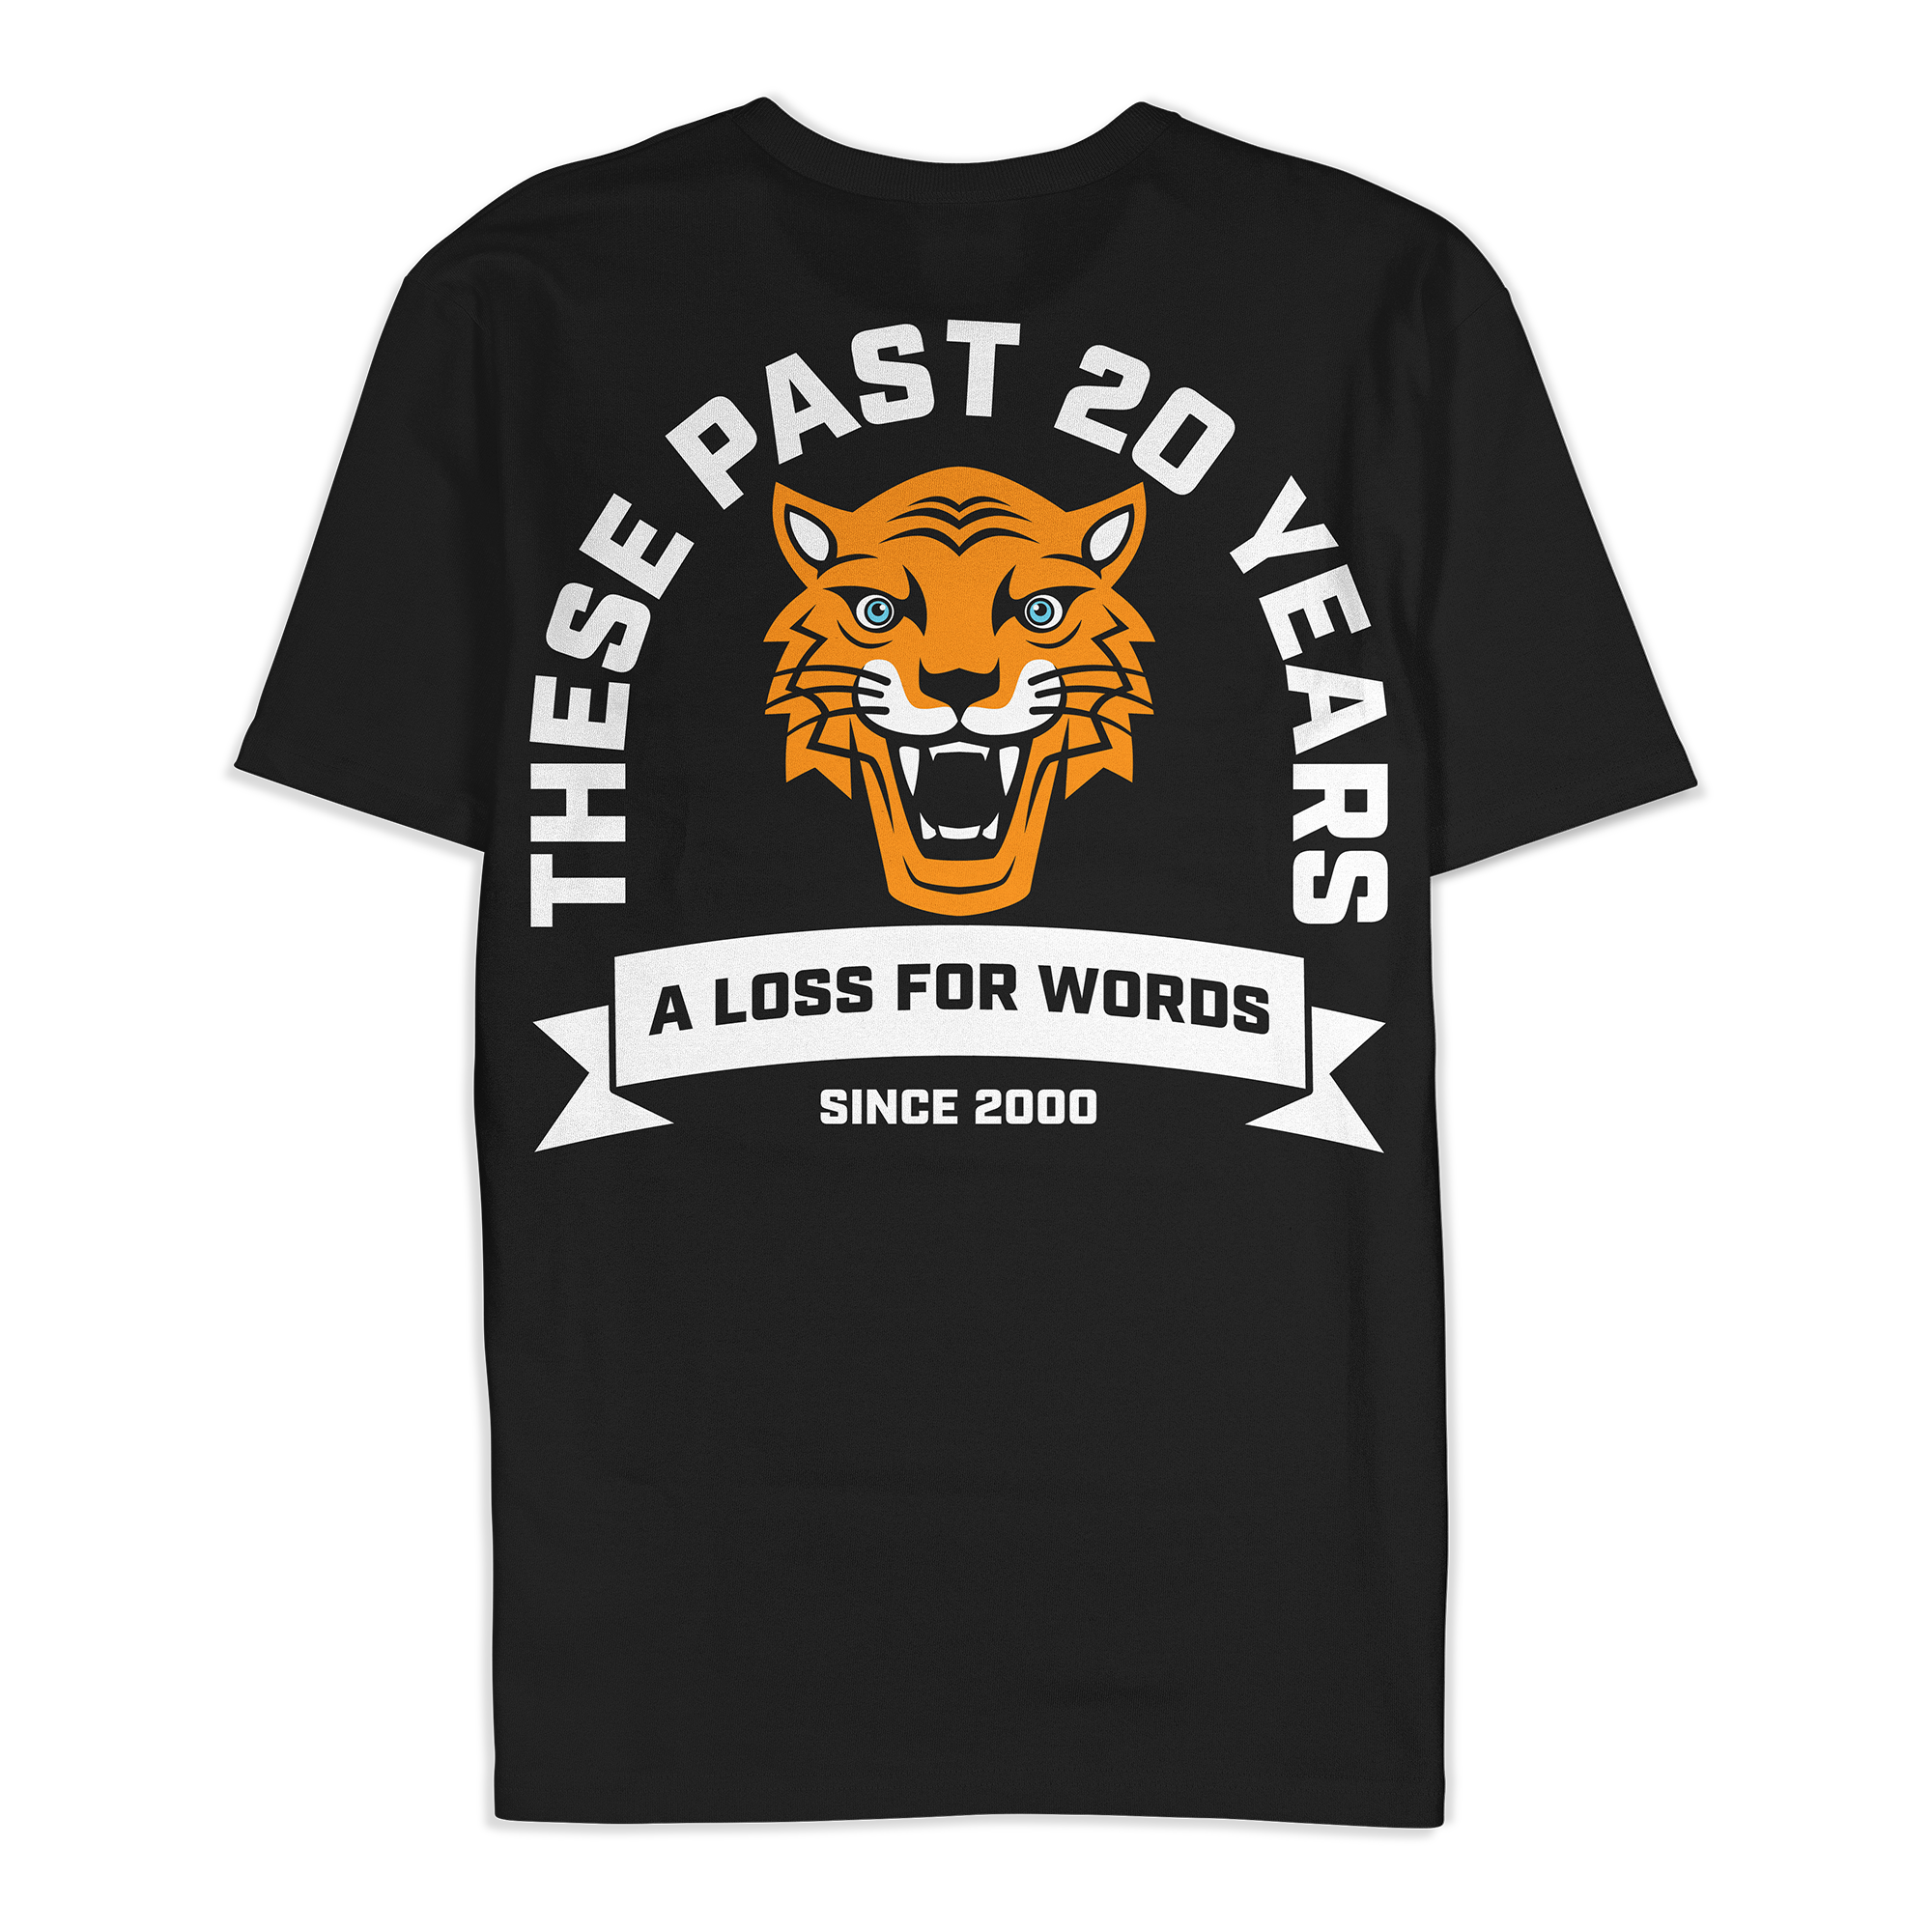 A Loss For Words - 20th Anniversary Shirt